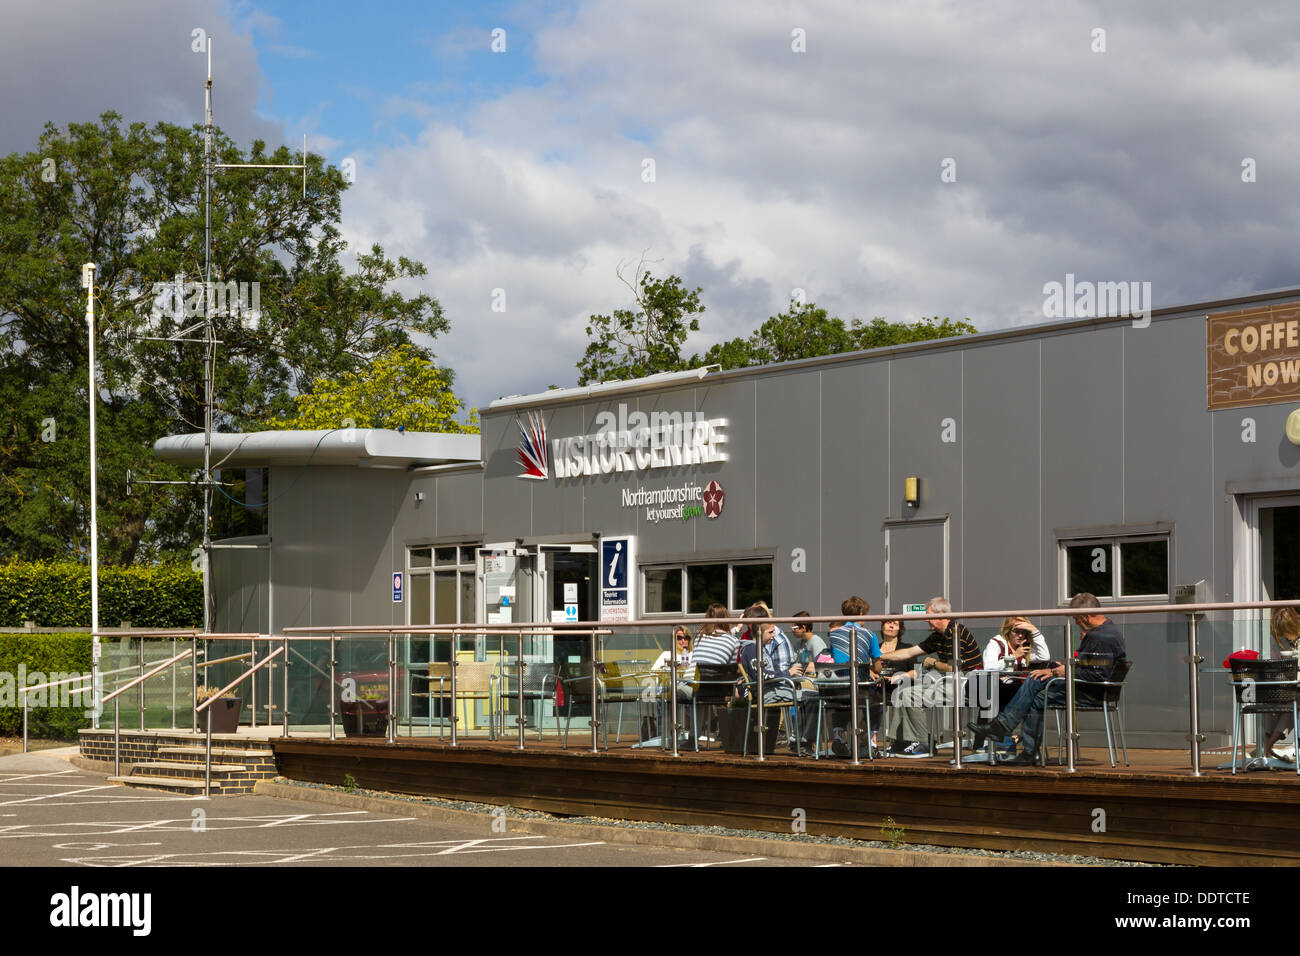 The Silverstone Visitor Centre at the racing circuit in Towcester, England. Stock Photo